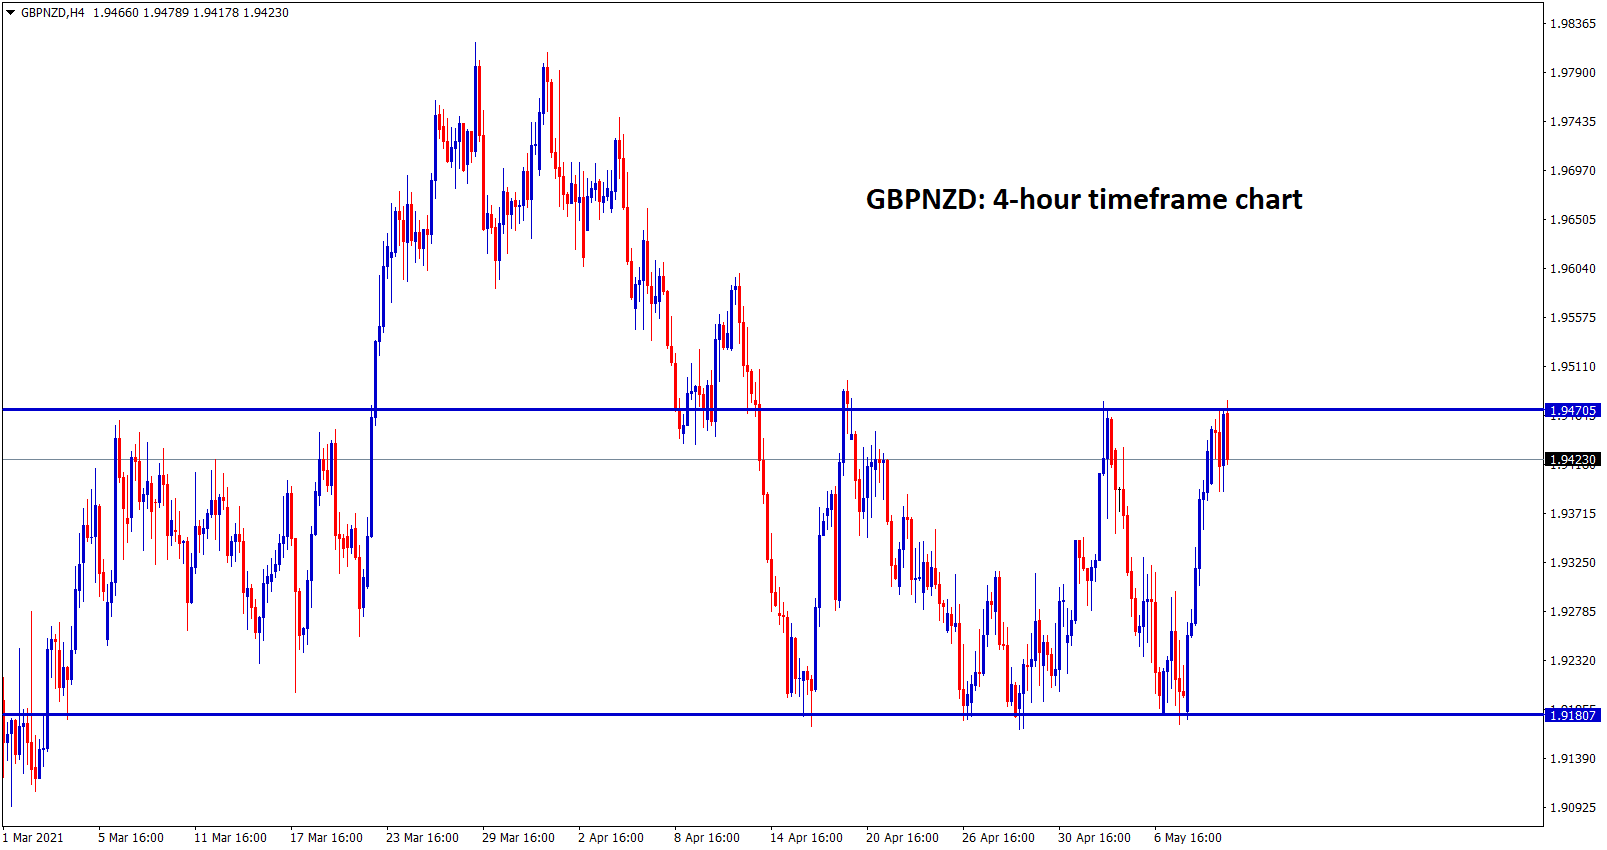 GBPNZD moving up and down between the resistance and support range.